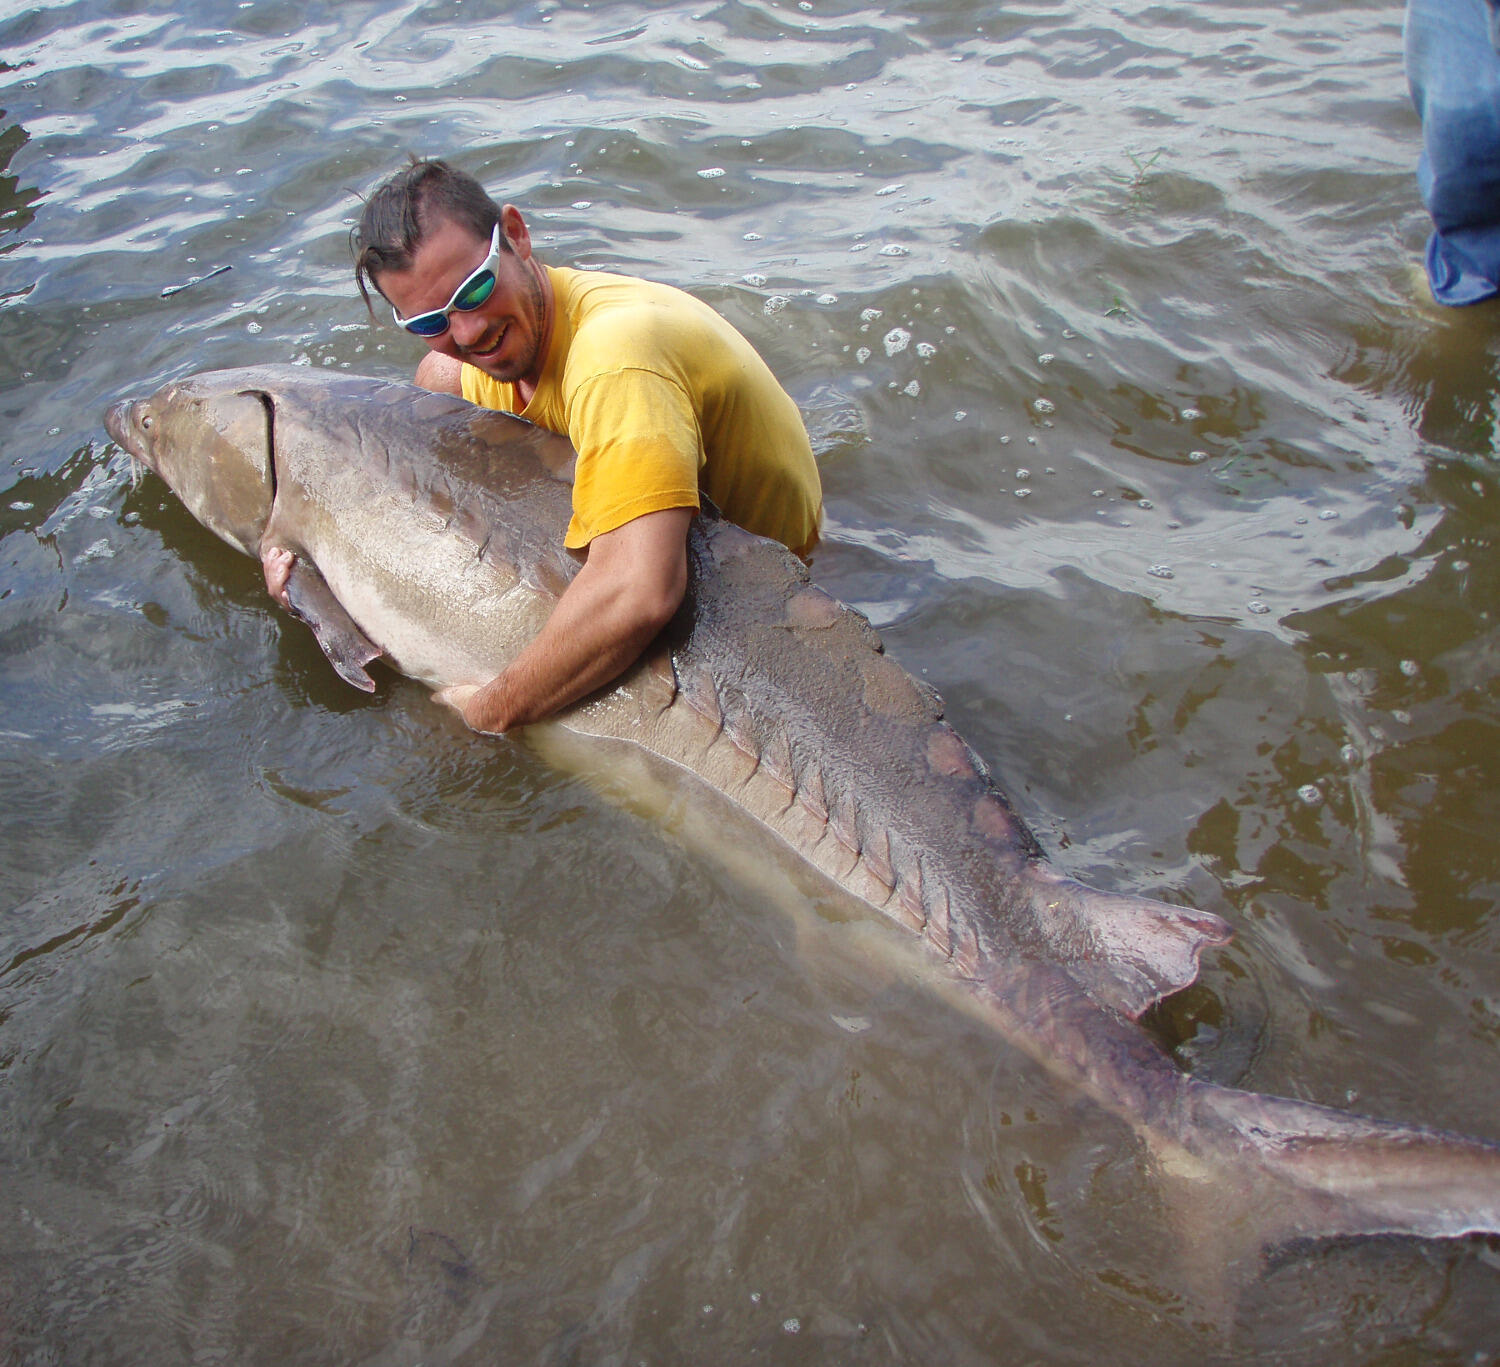 Though giant, sturgeon are a docile and even huggable fish.
